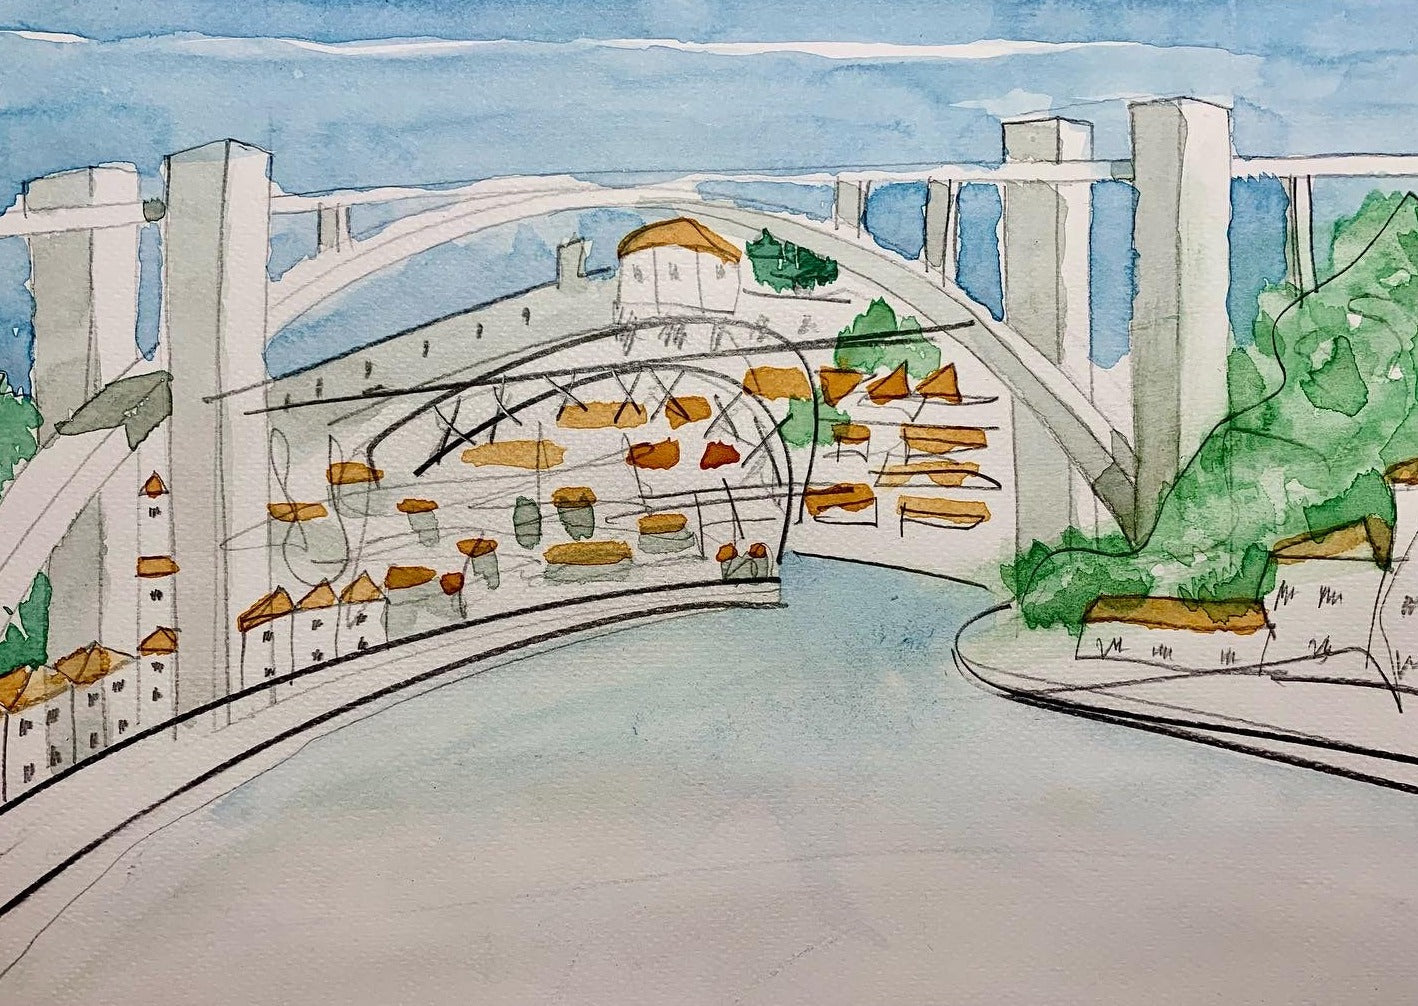 Painting Workshop "Porto’s Special Spots in Watercolors" with Joana in Porto, Portugal by subcultours